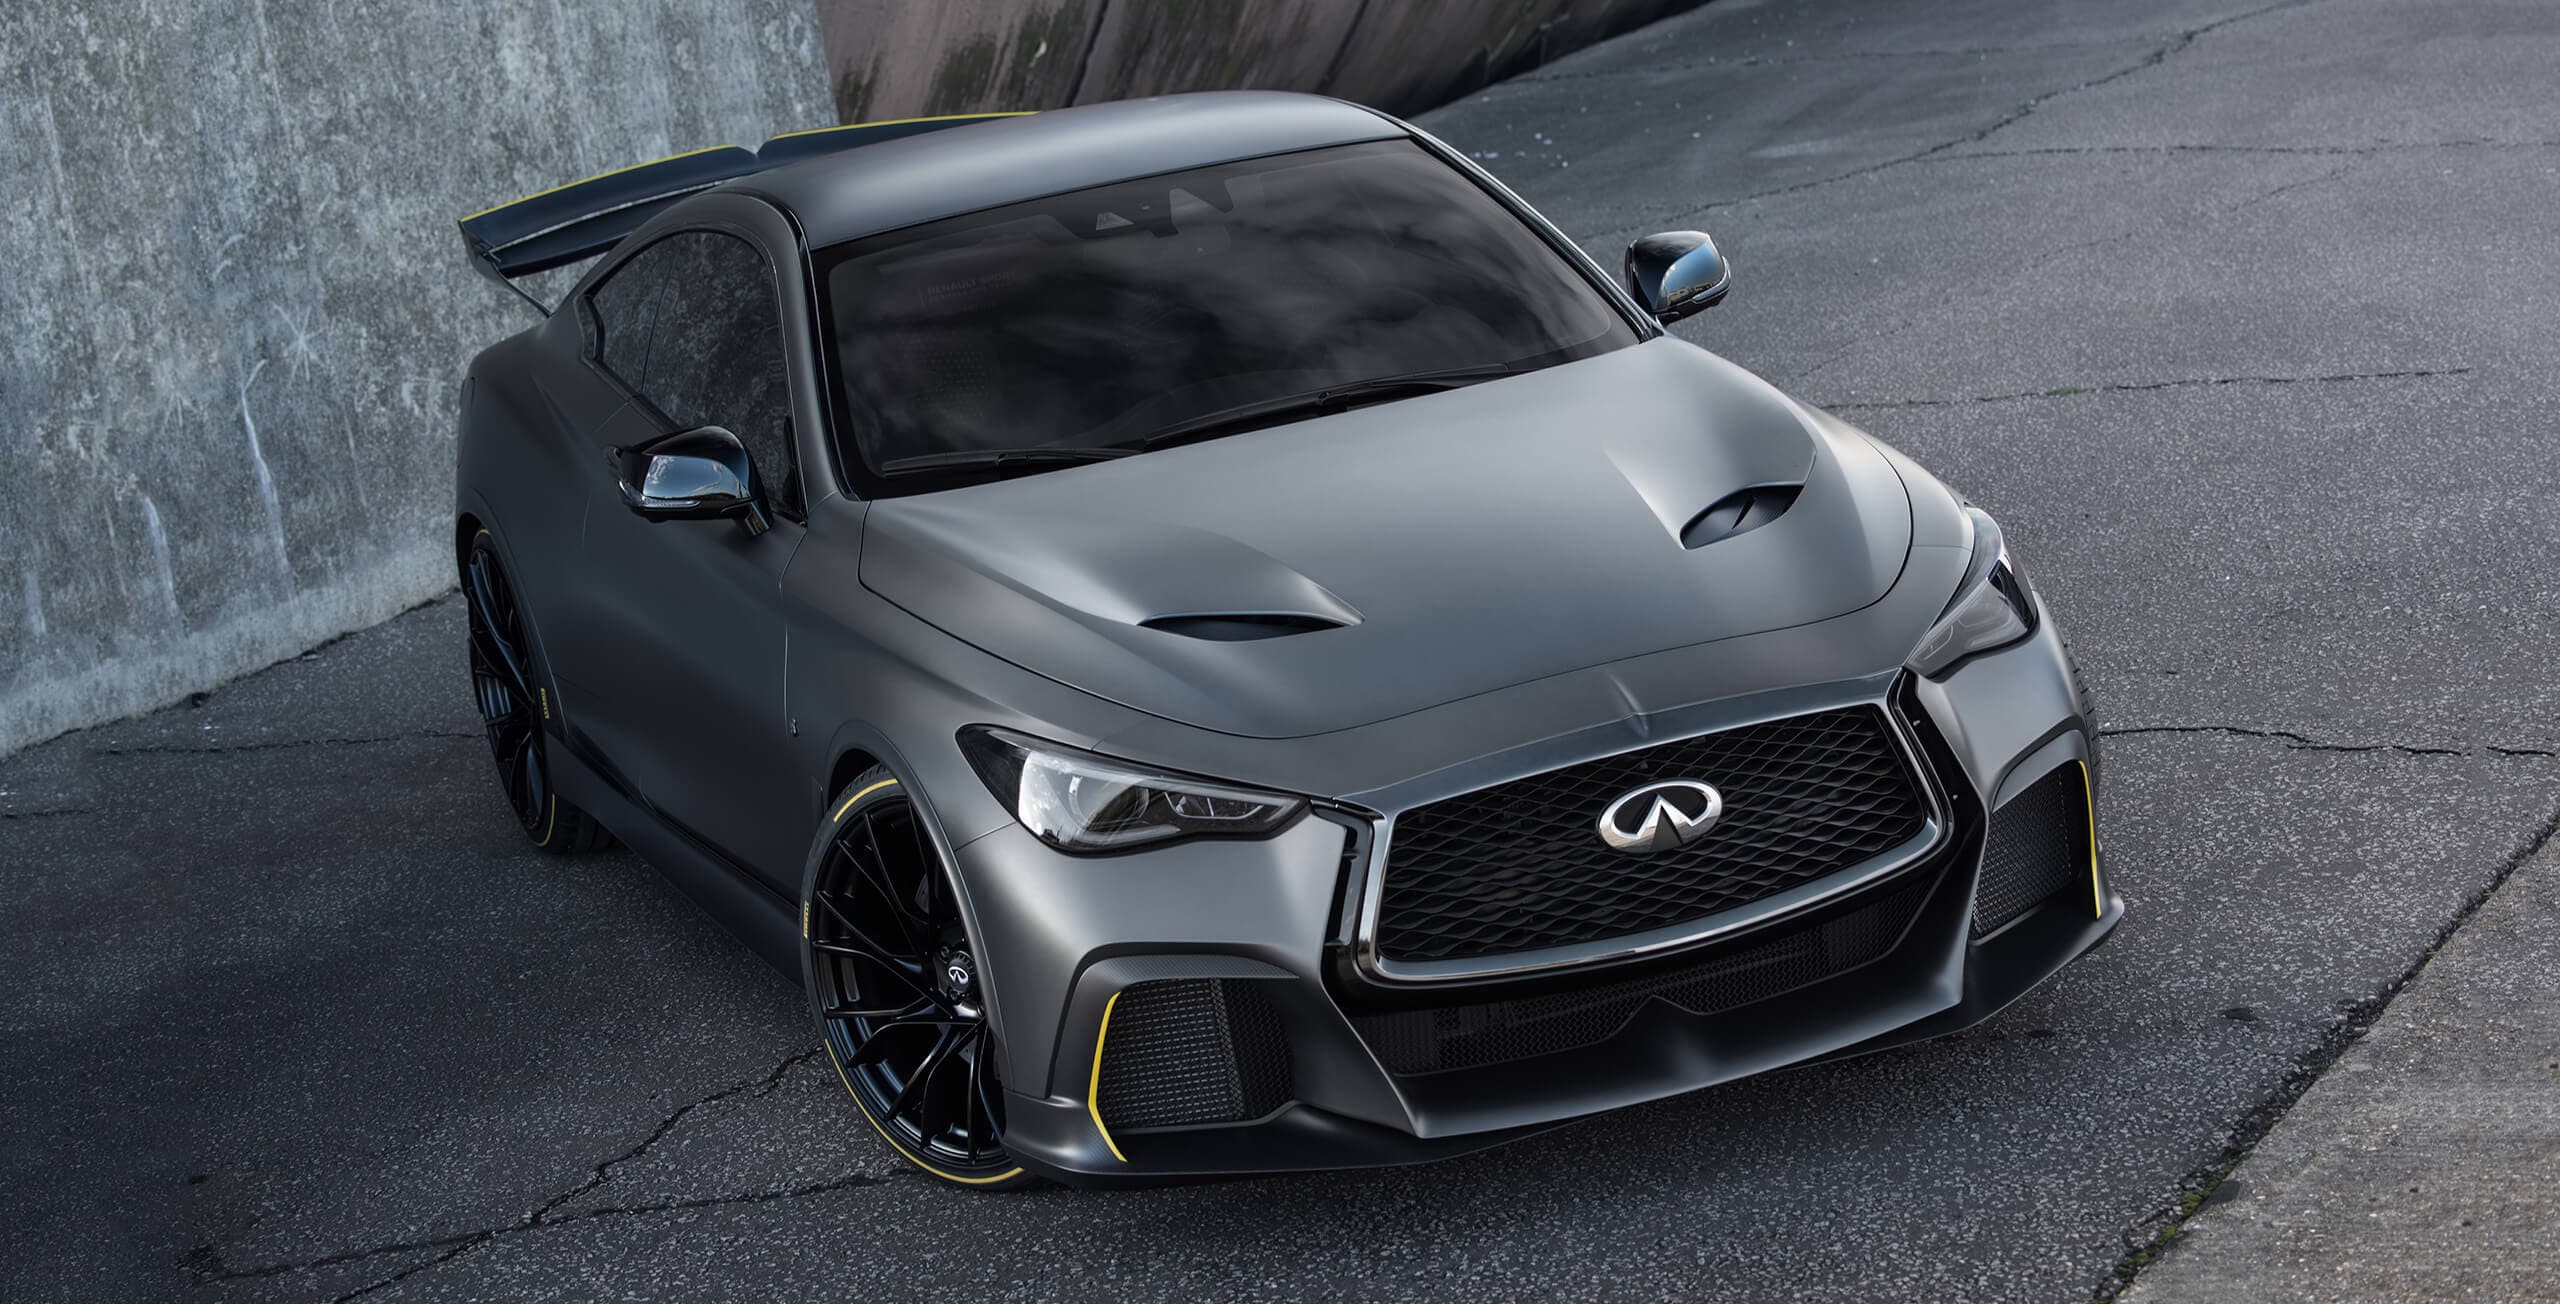  A front angled passenger's side view of the INFINITI Q60 Black S Sports Concept Car parked on asphalt